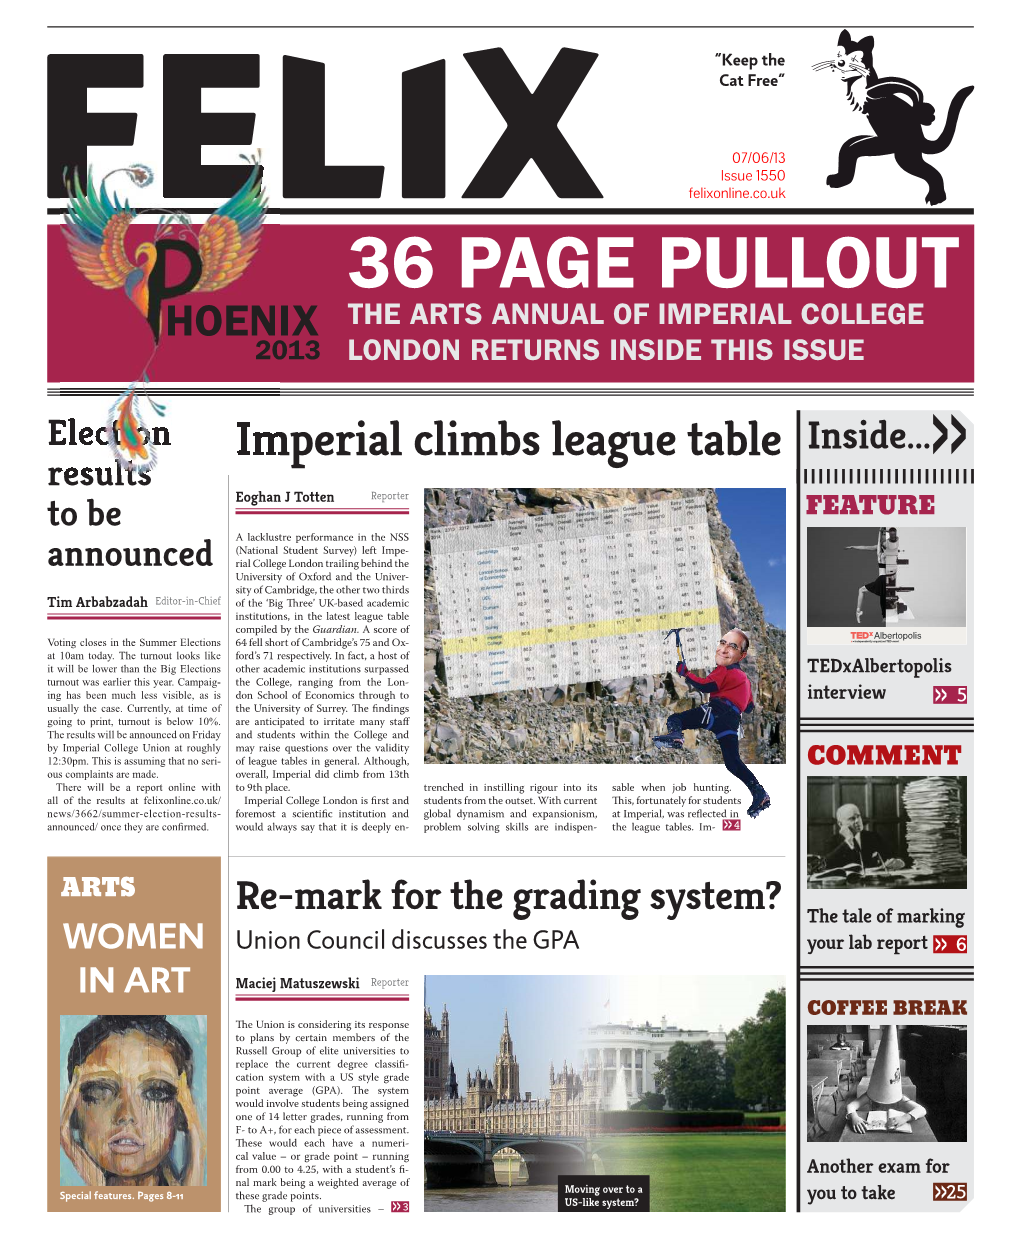 36 Page Pullout Hoenix the Arts Annual of Imperial College 2013 London Returns Inside This Issue